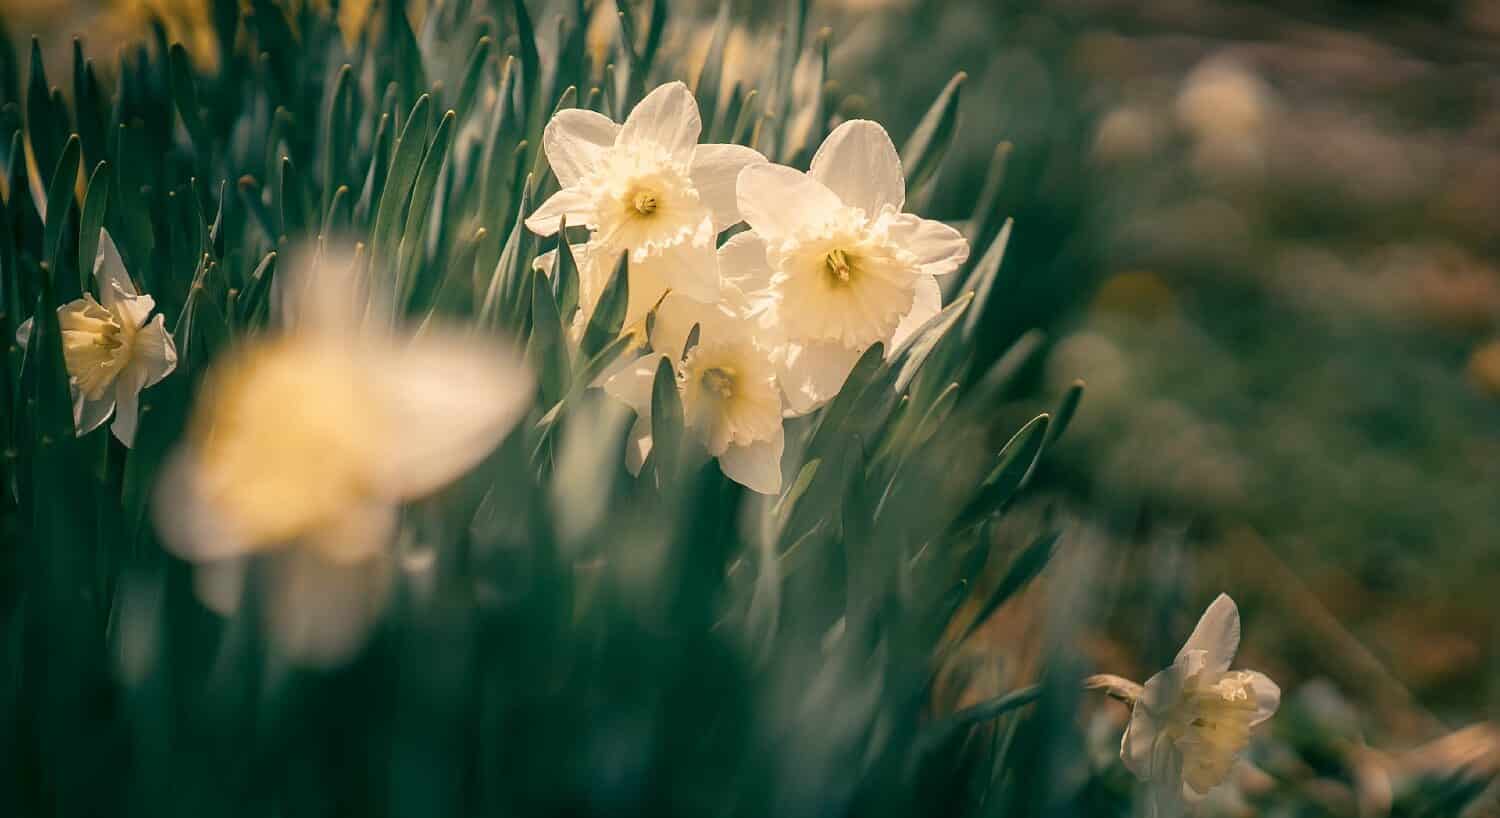 Pale yellow daffodils and green stems with blurred background